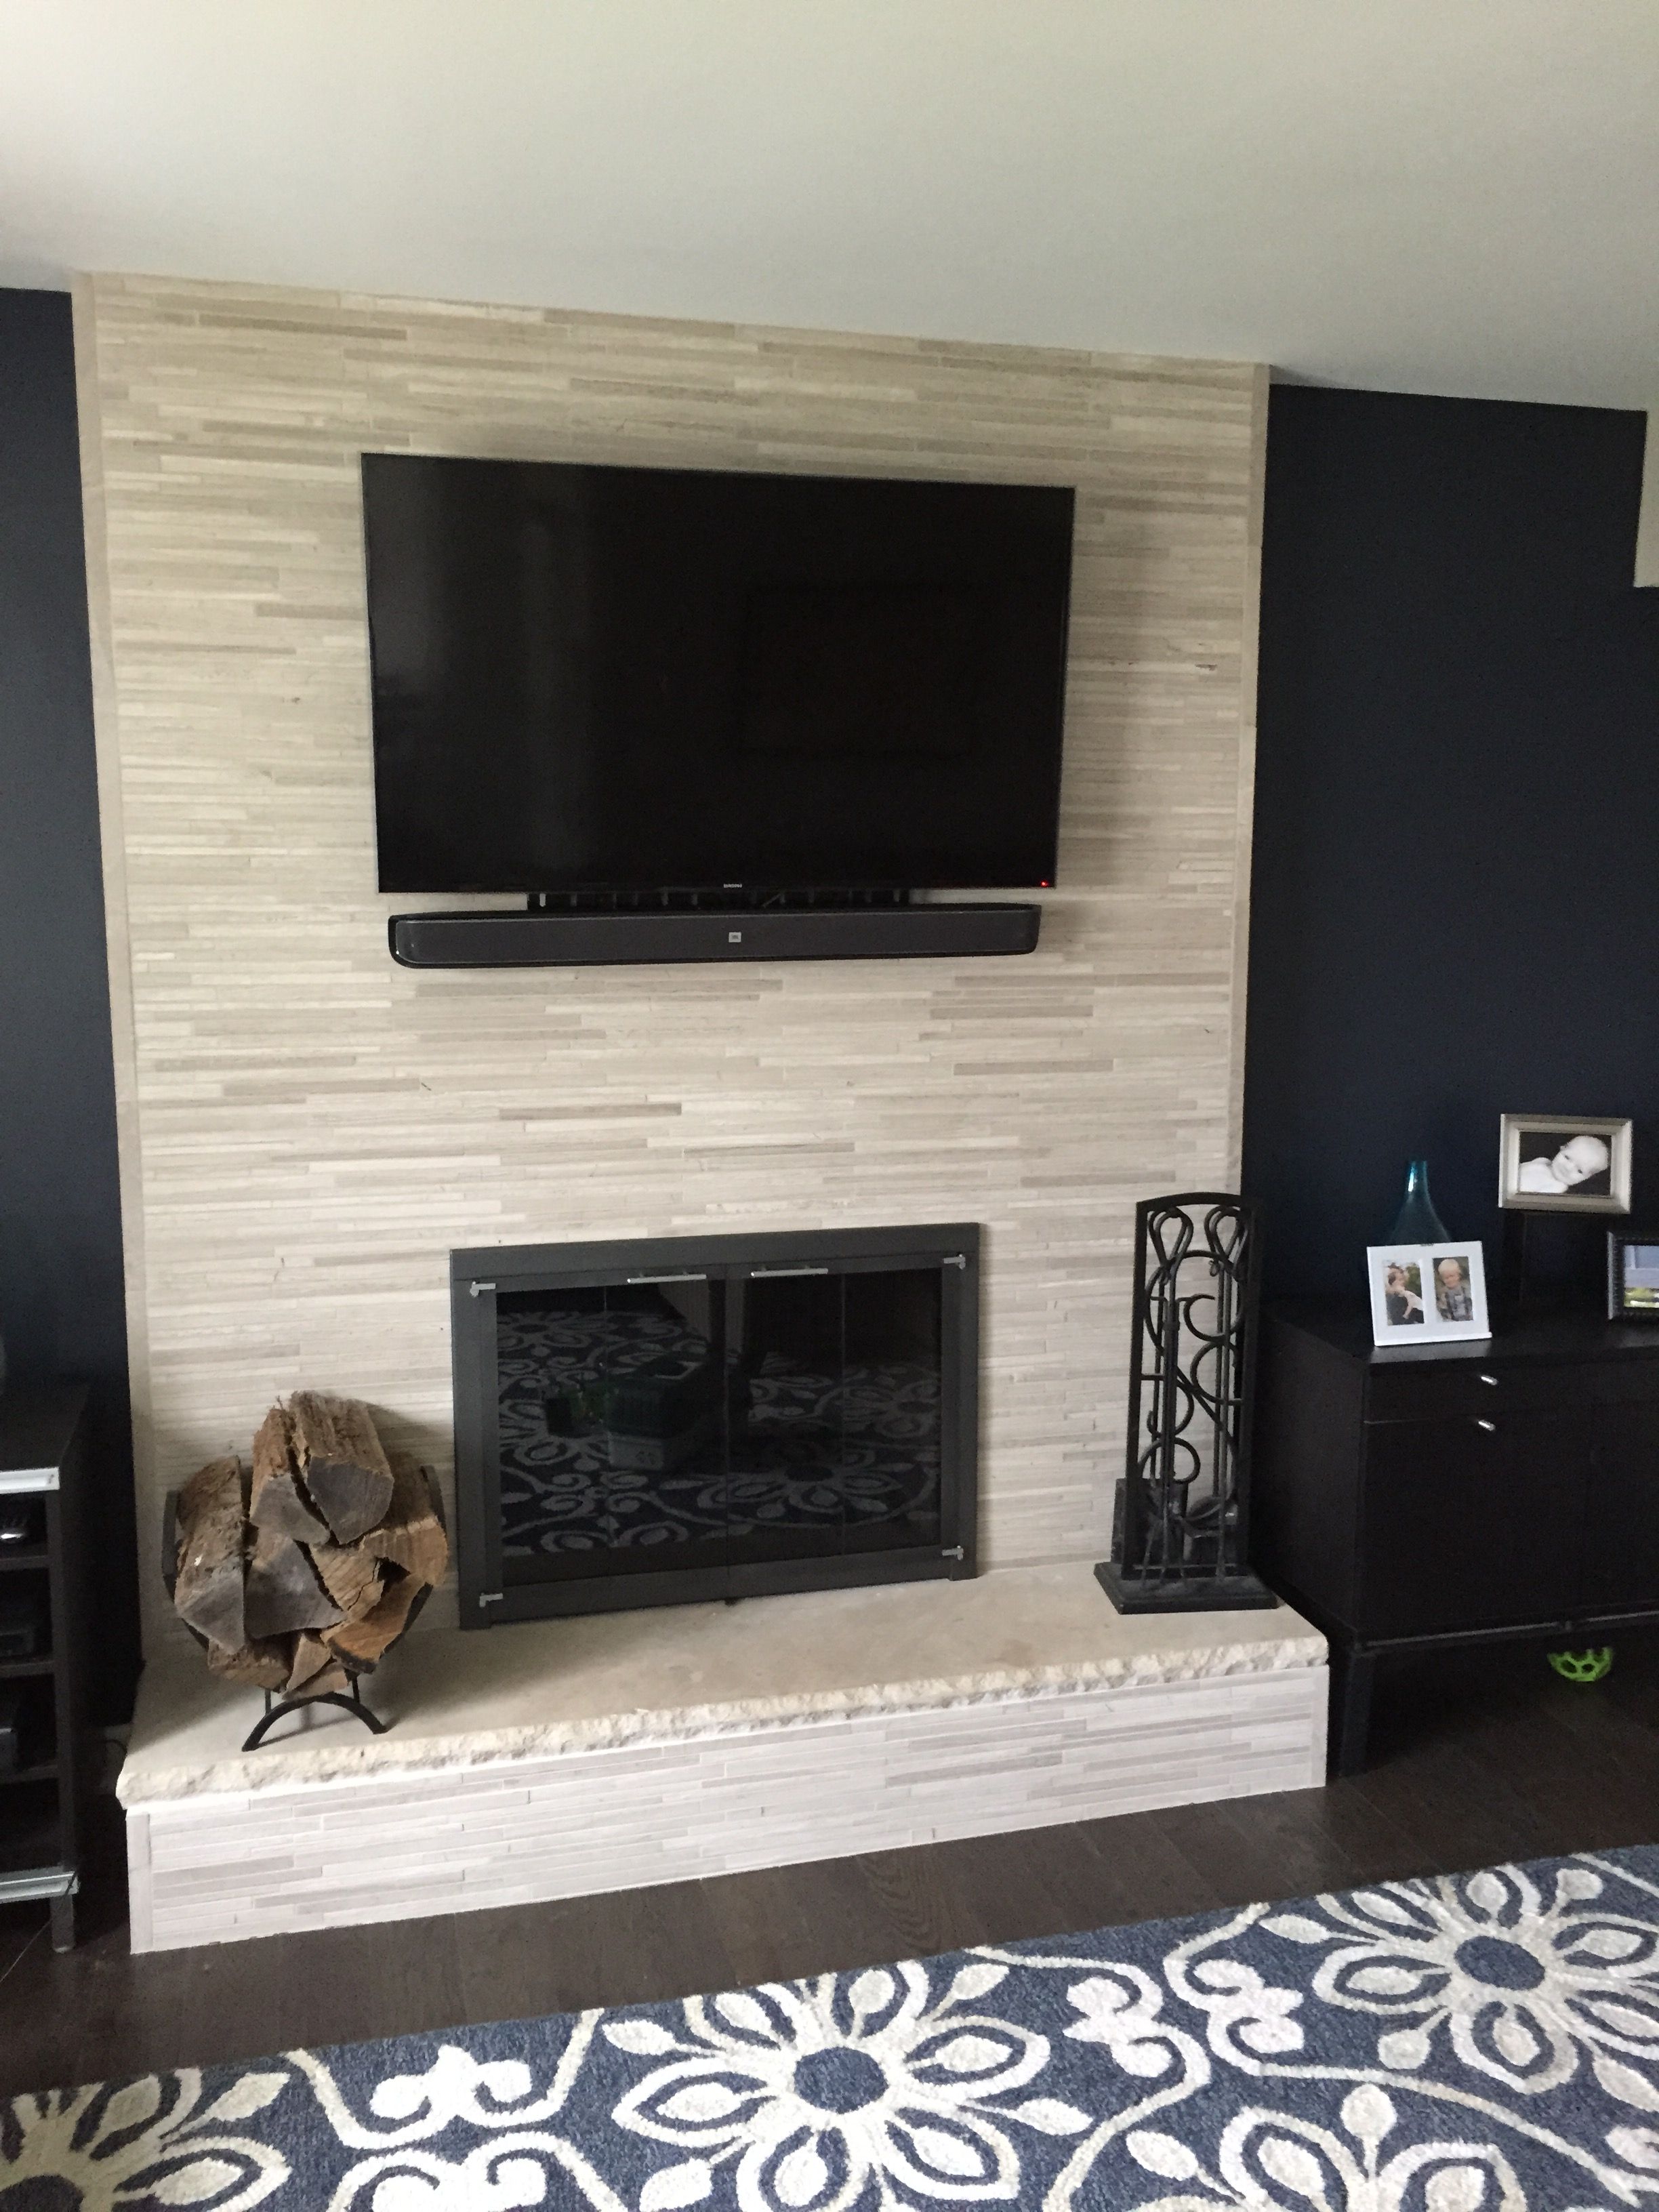 Refacing Brick Fireplace Elegant Our Old Fireplace Was 80 S 90 S Brick Veneer to Give It An